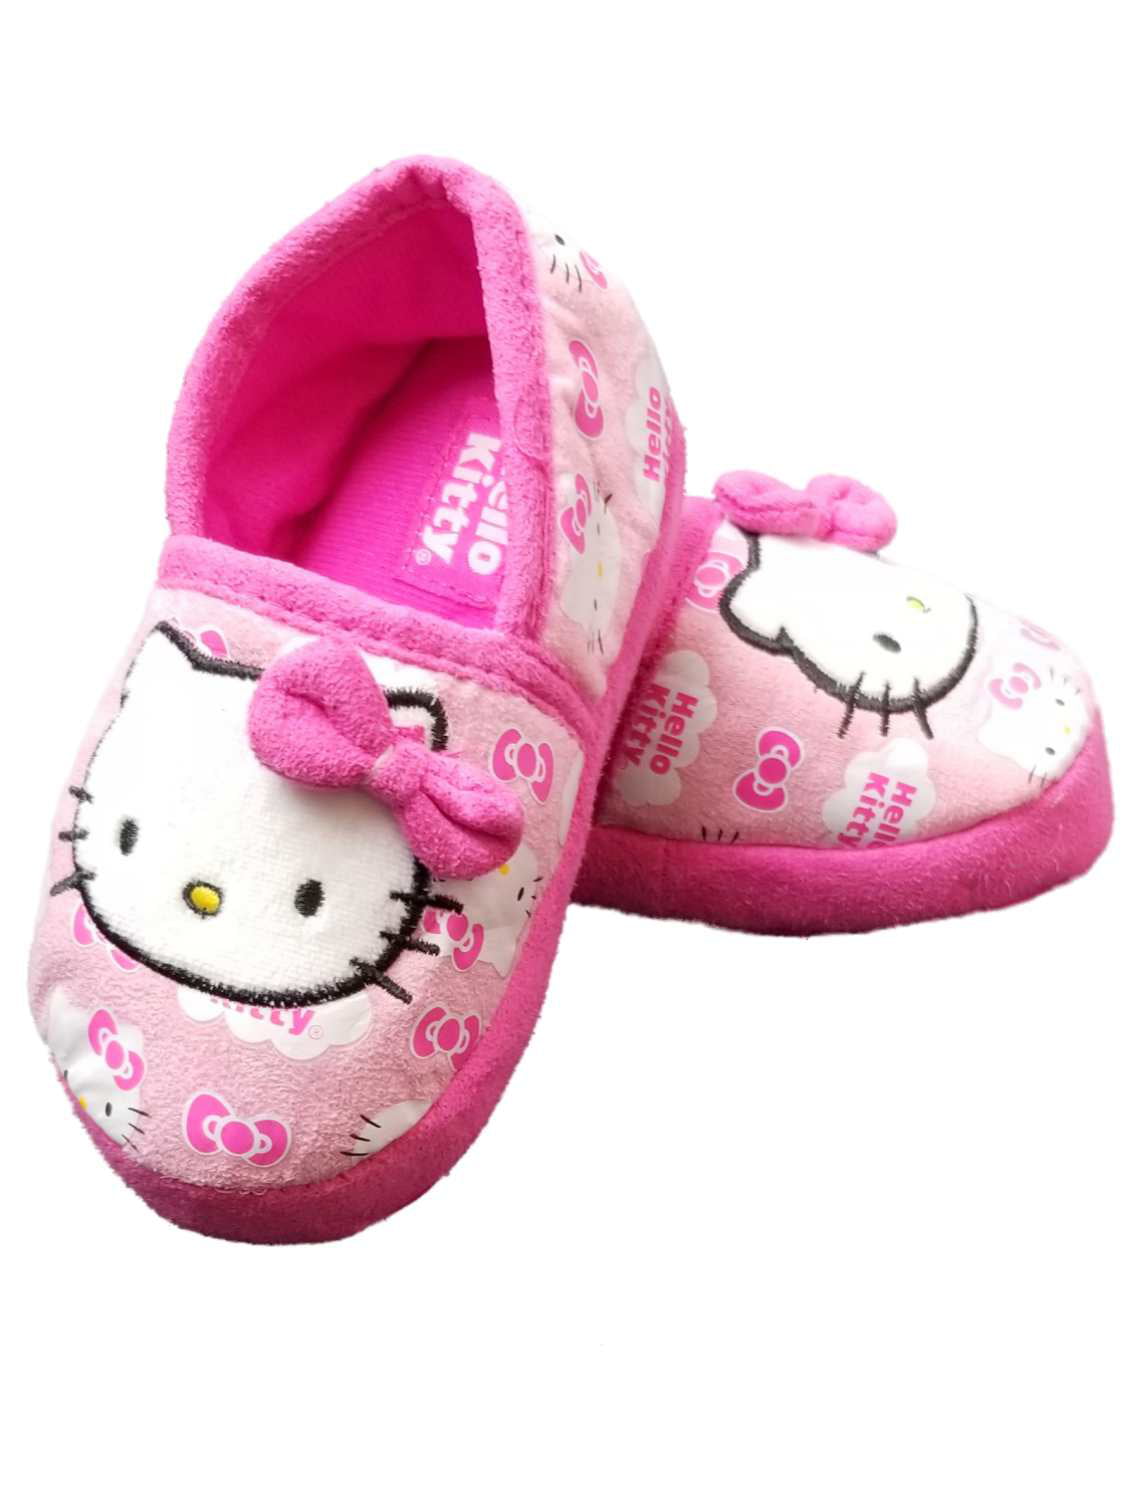  Hello  Kitty  Hello  Kitty  Pink Toddler Girls Soft Slippers 